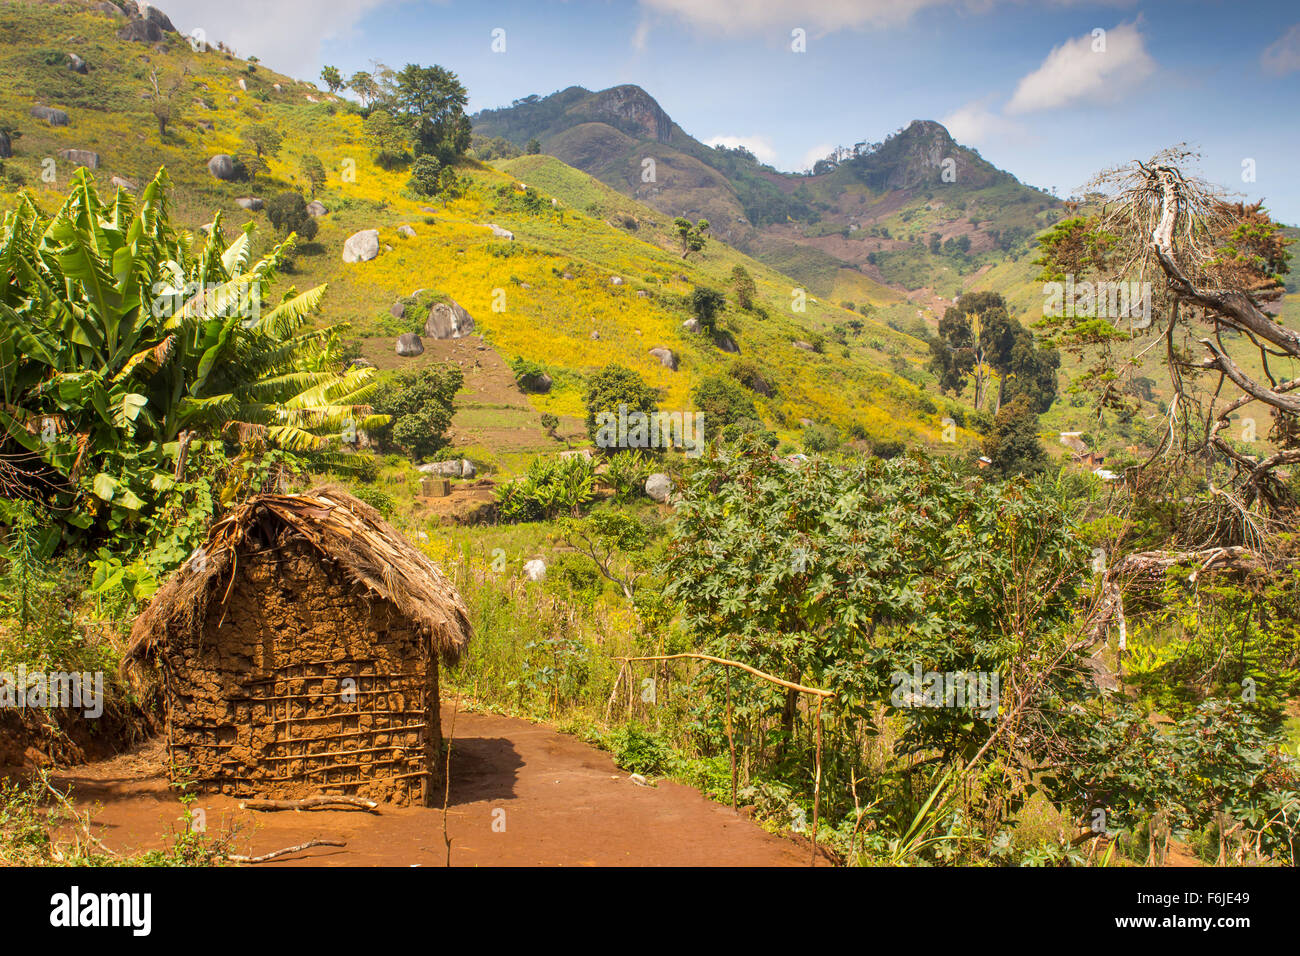 African mud hut in the mountains, with thatched roof. Banana tree behind. Stock Photo